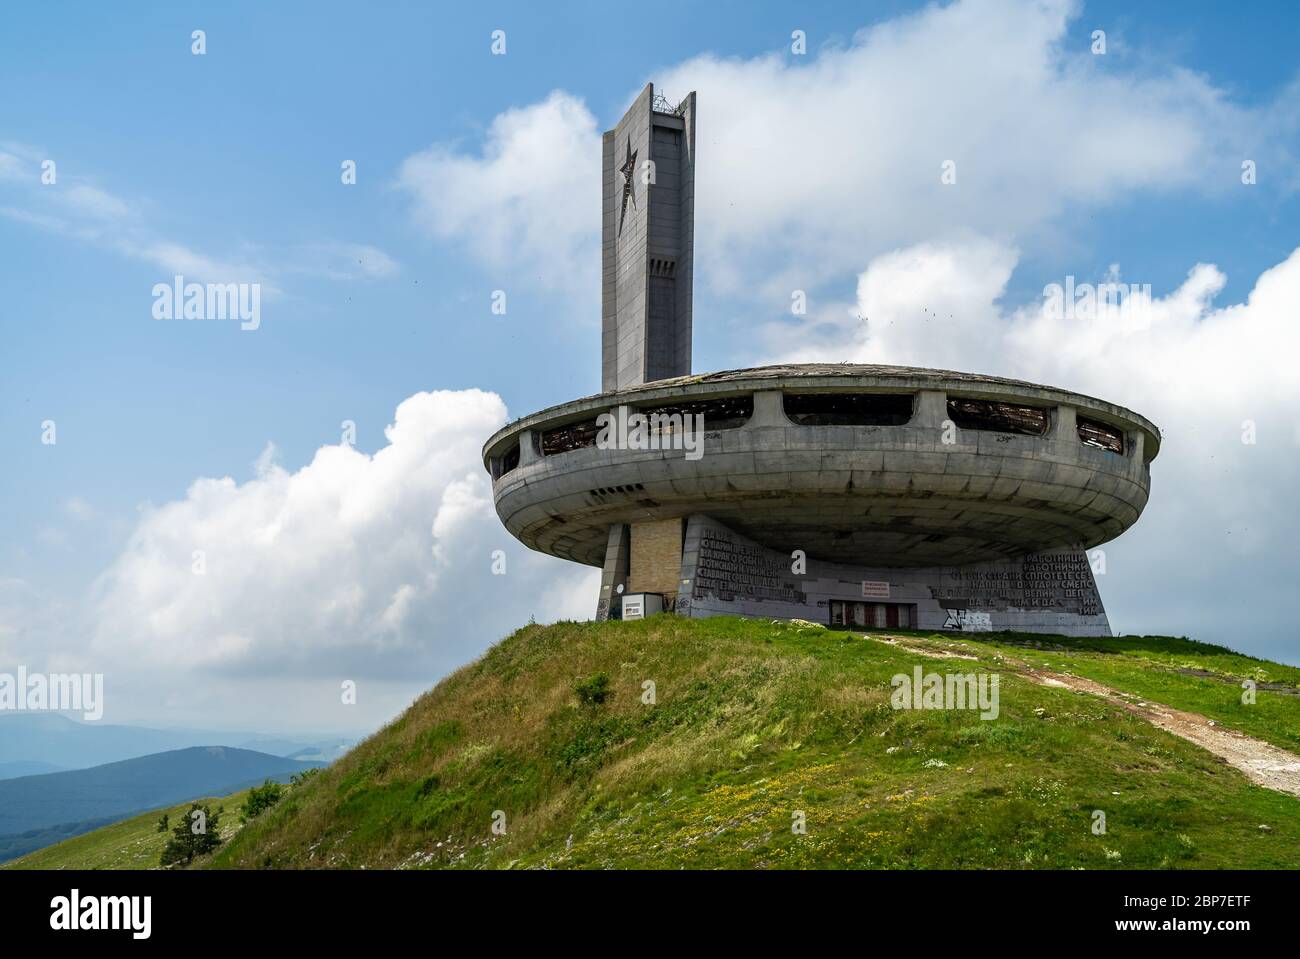 BUZLUDZHA, BULGARIA - JULY 07, 2019: The Monument House of the Bulgarian Communist Party on the Buzludzha Peak of the Balkan mountain range. At the moment, the monument is looted and abandoned. Stock Photo